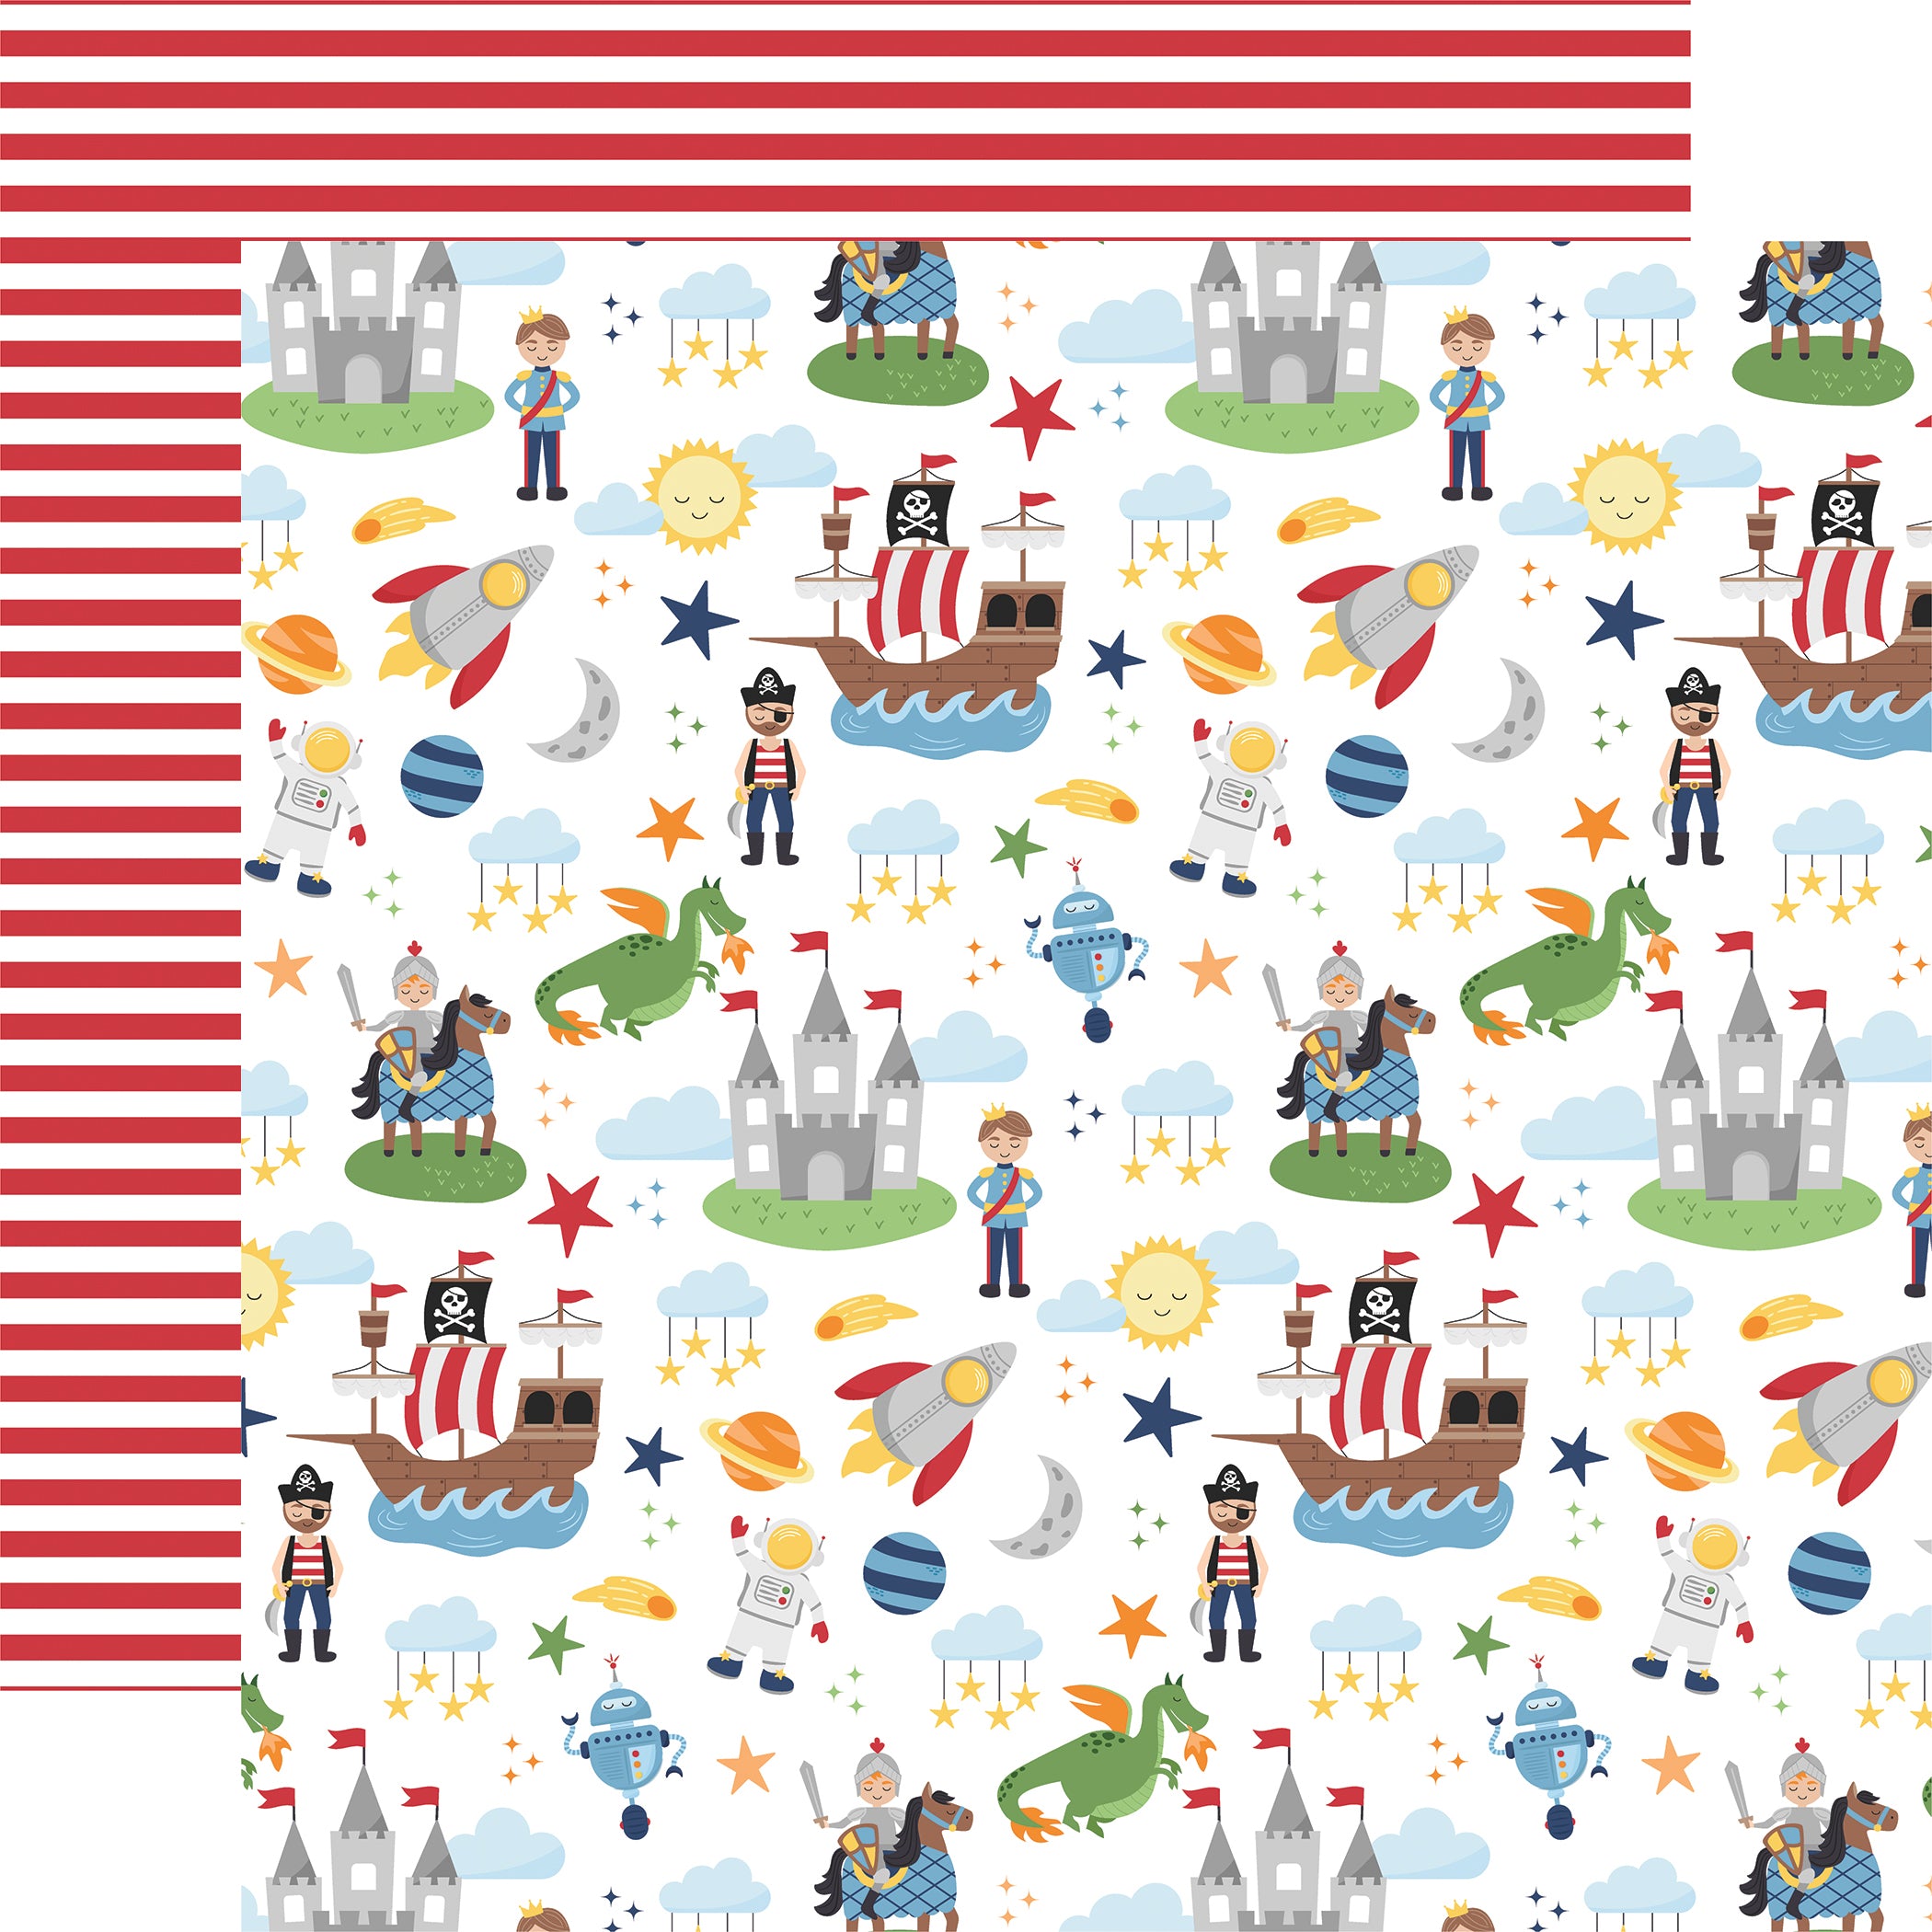 My Little Boy Collection Dreaming Of Adventure 12 x 12 Double-Sided Scrapbook Paper by Echo Park Paper